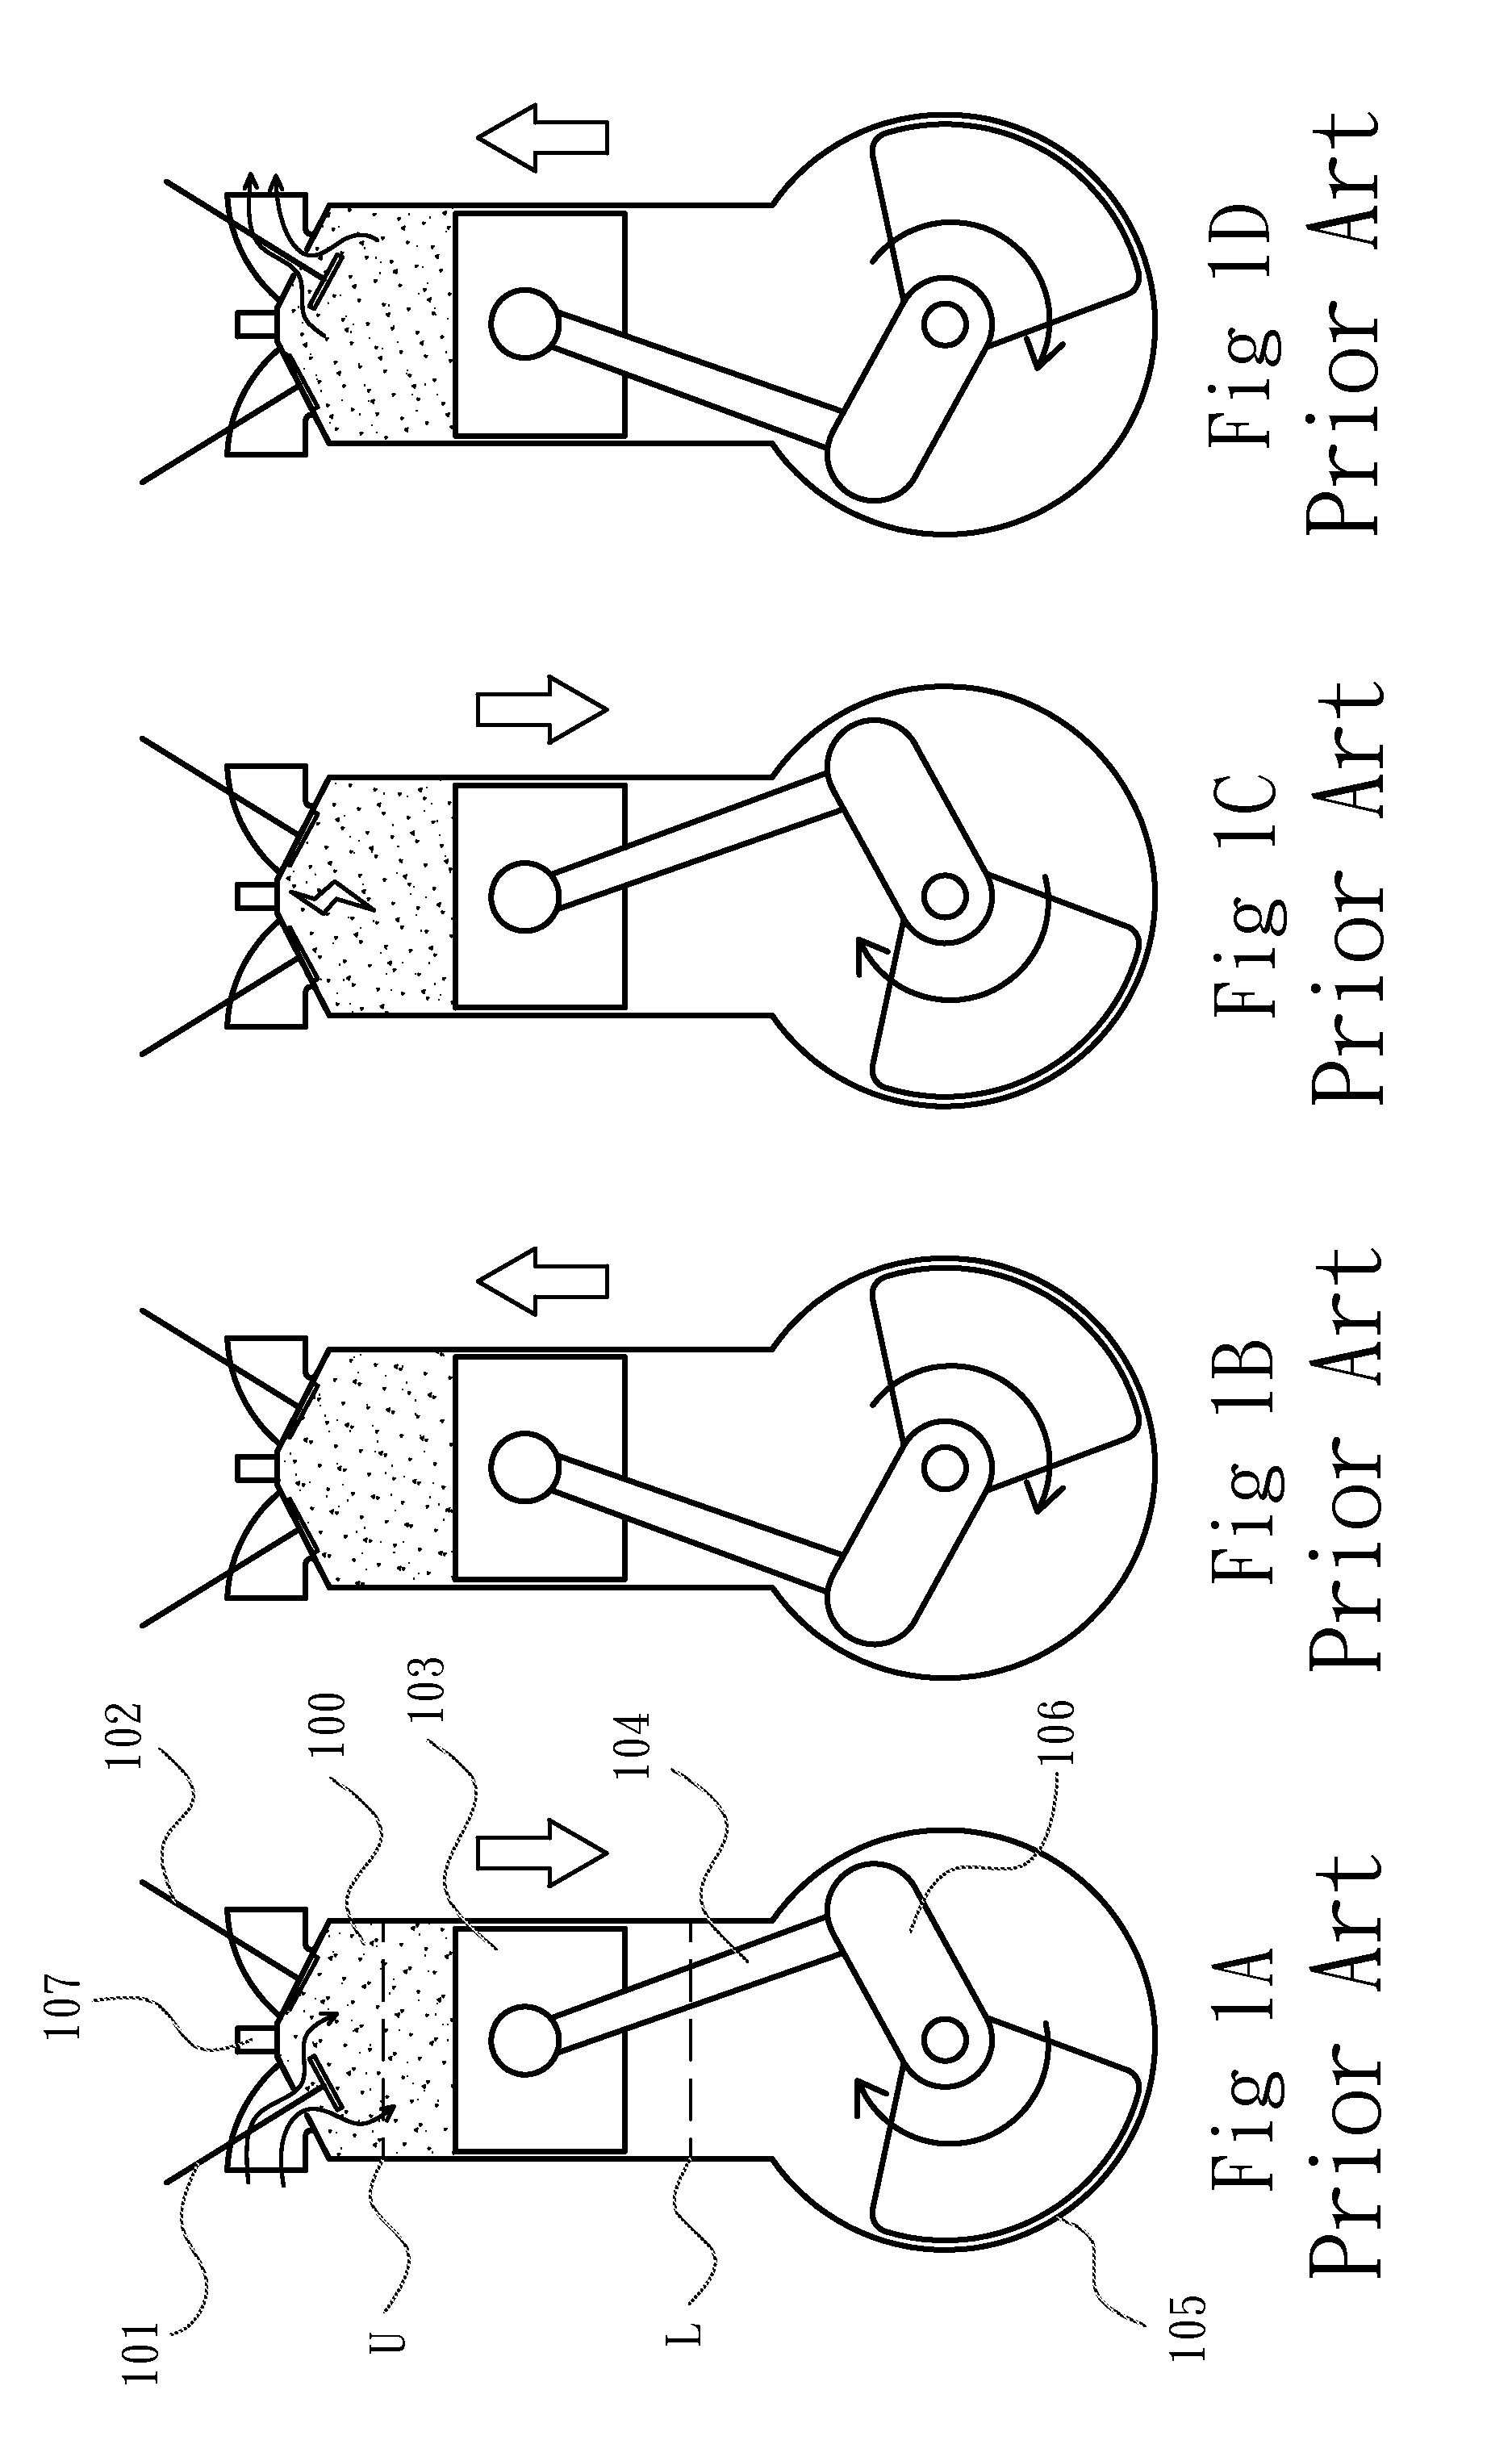 Engine structure having conjugate cam assembly